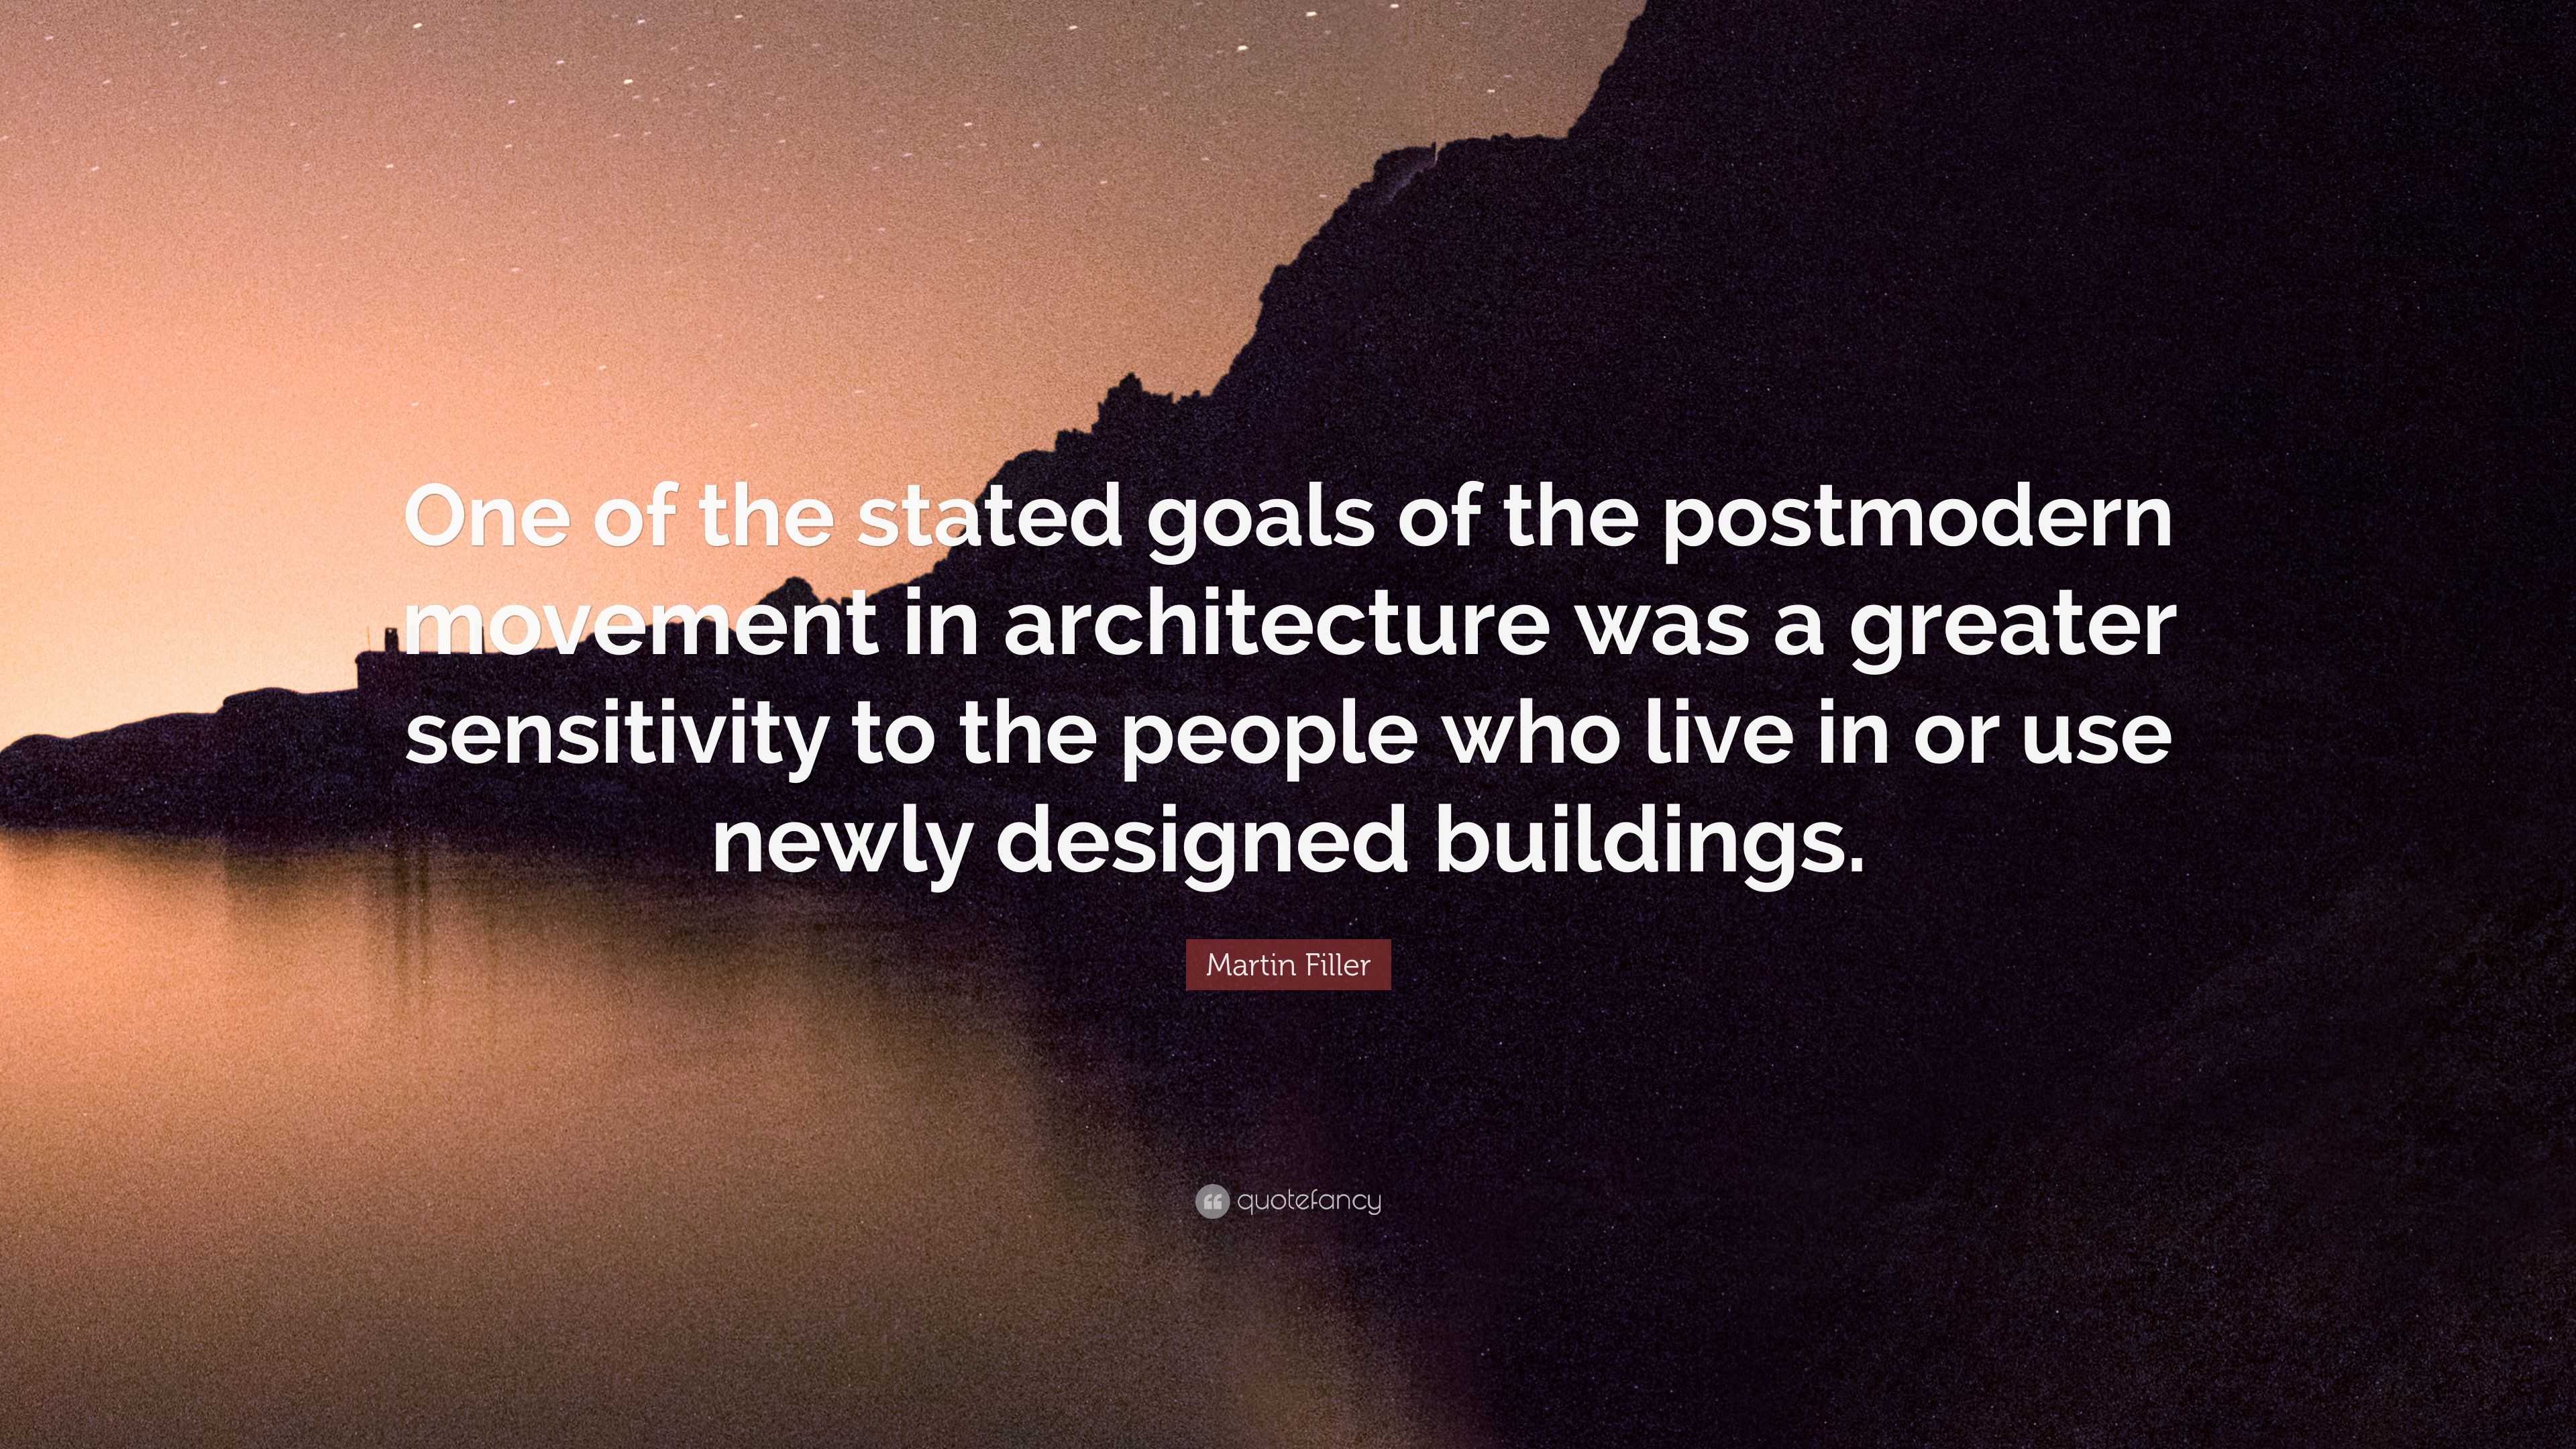 Martin Filler Quote: “One of the stated goals of the postmodern ...